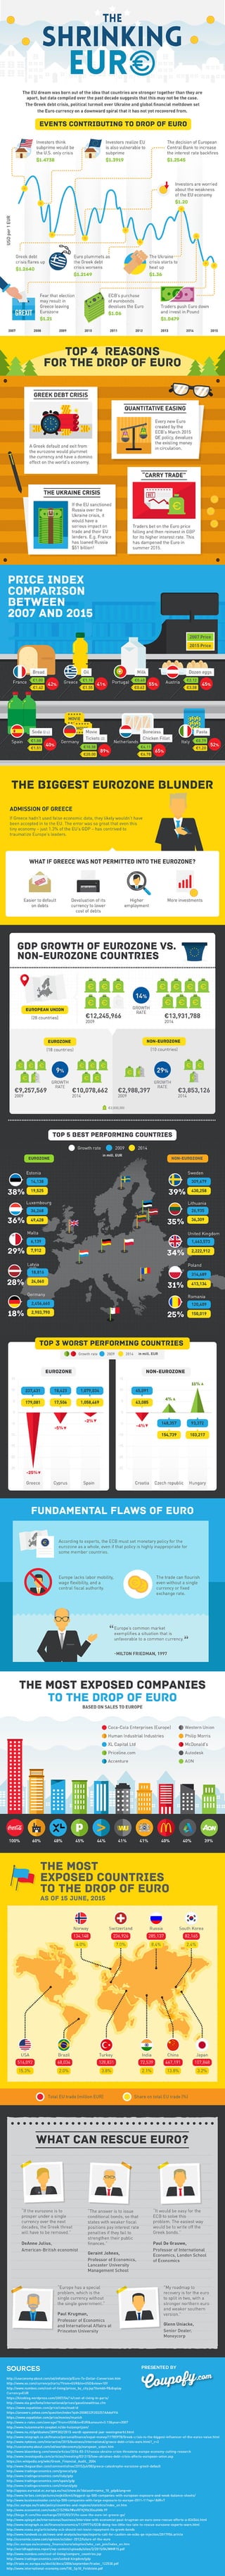 The Shrinking Euro Infographic